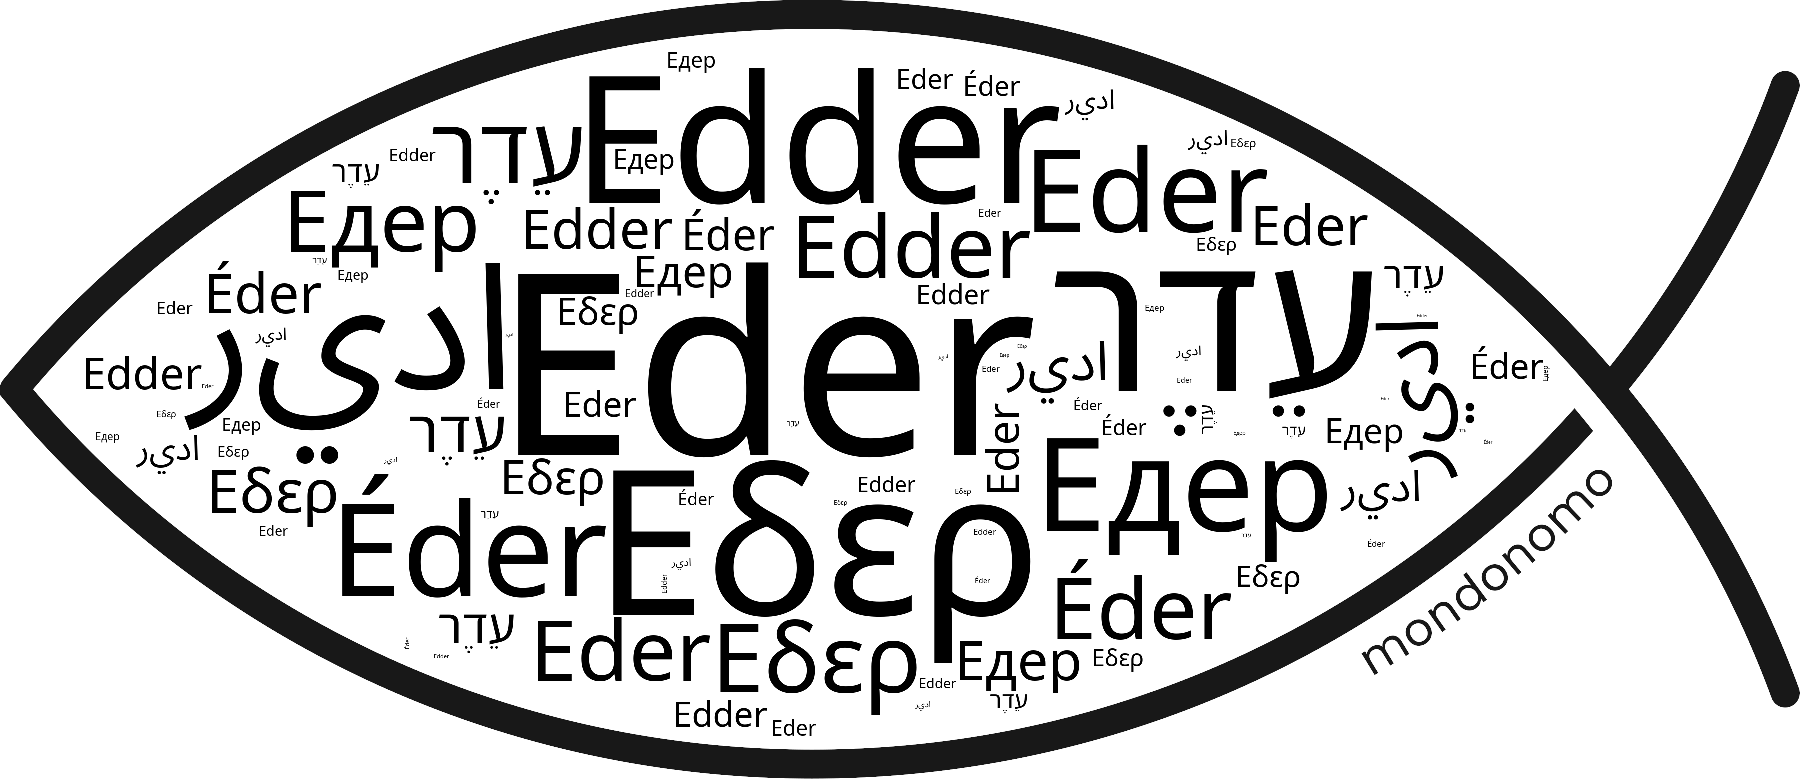 Name Eder in the world's Bibles